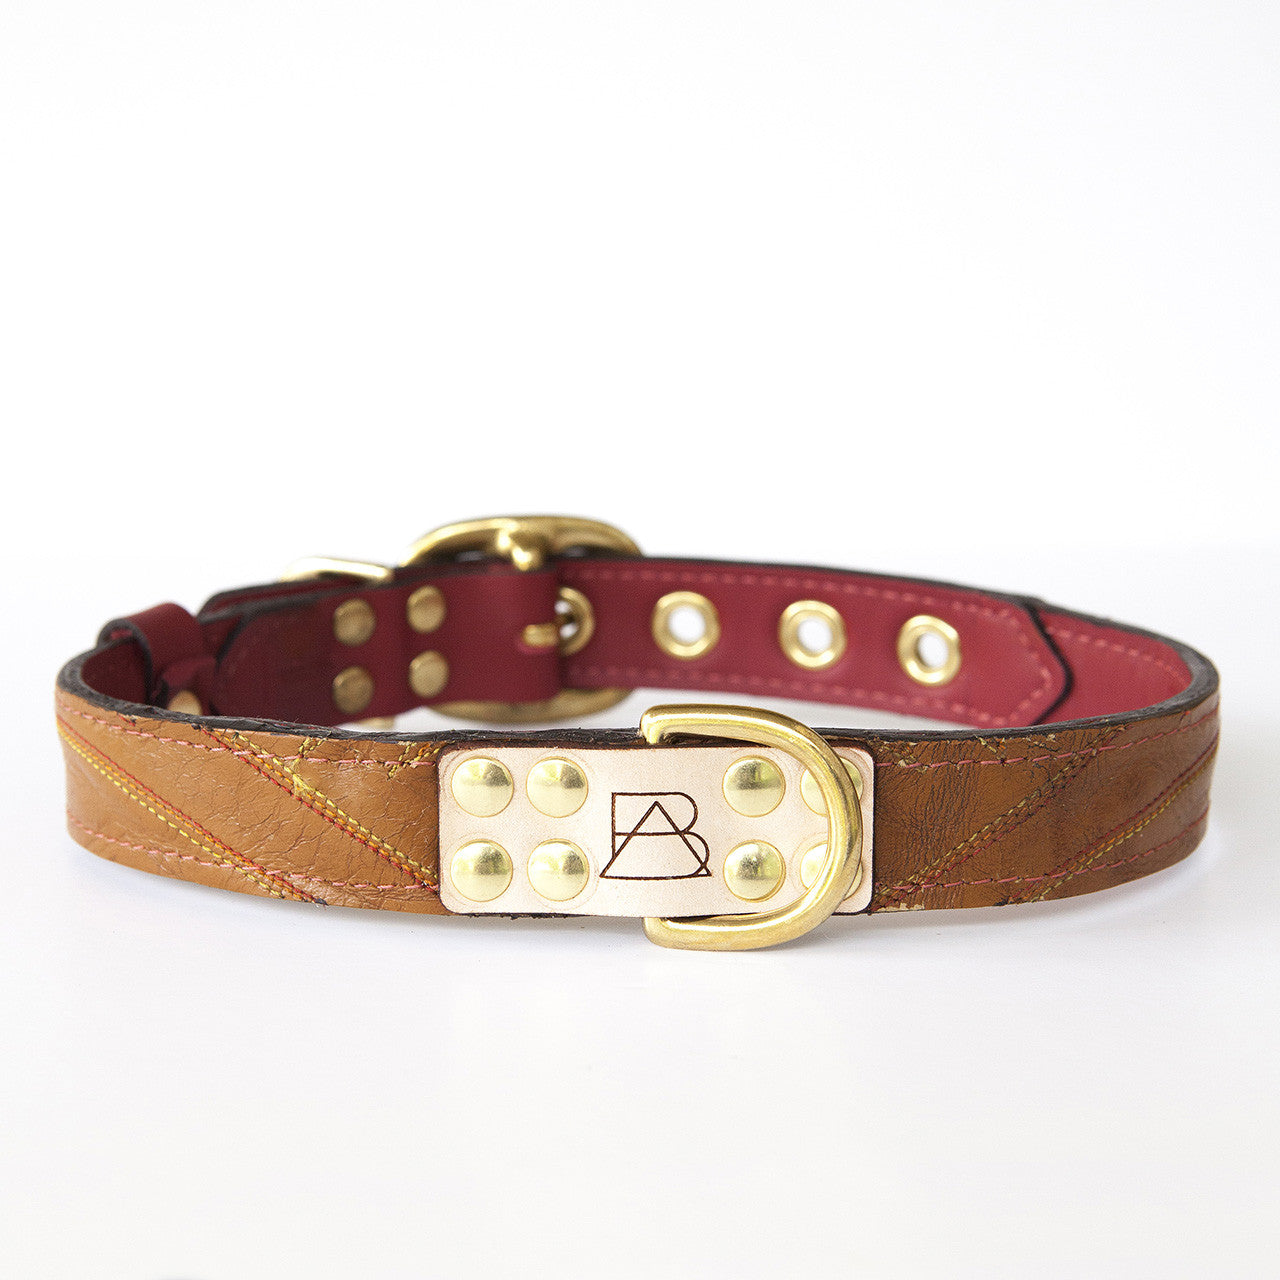 Ruby Red Dog Collar with Brown Leather + Multicolor Stitching (front view)